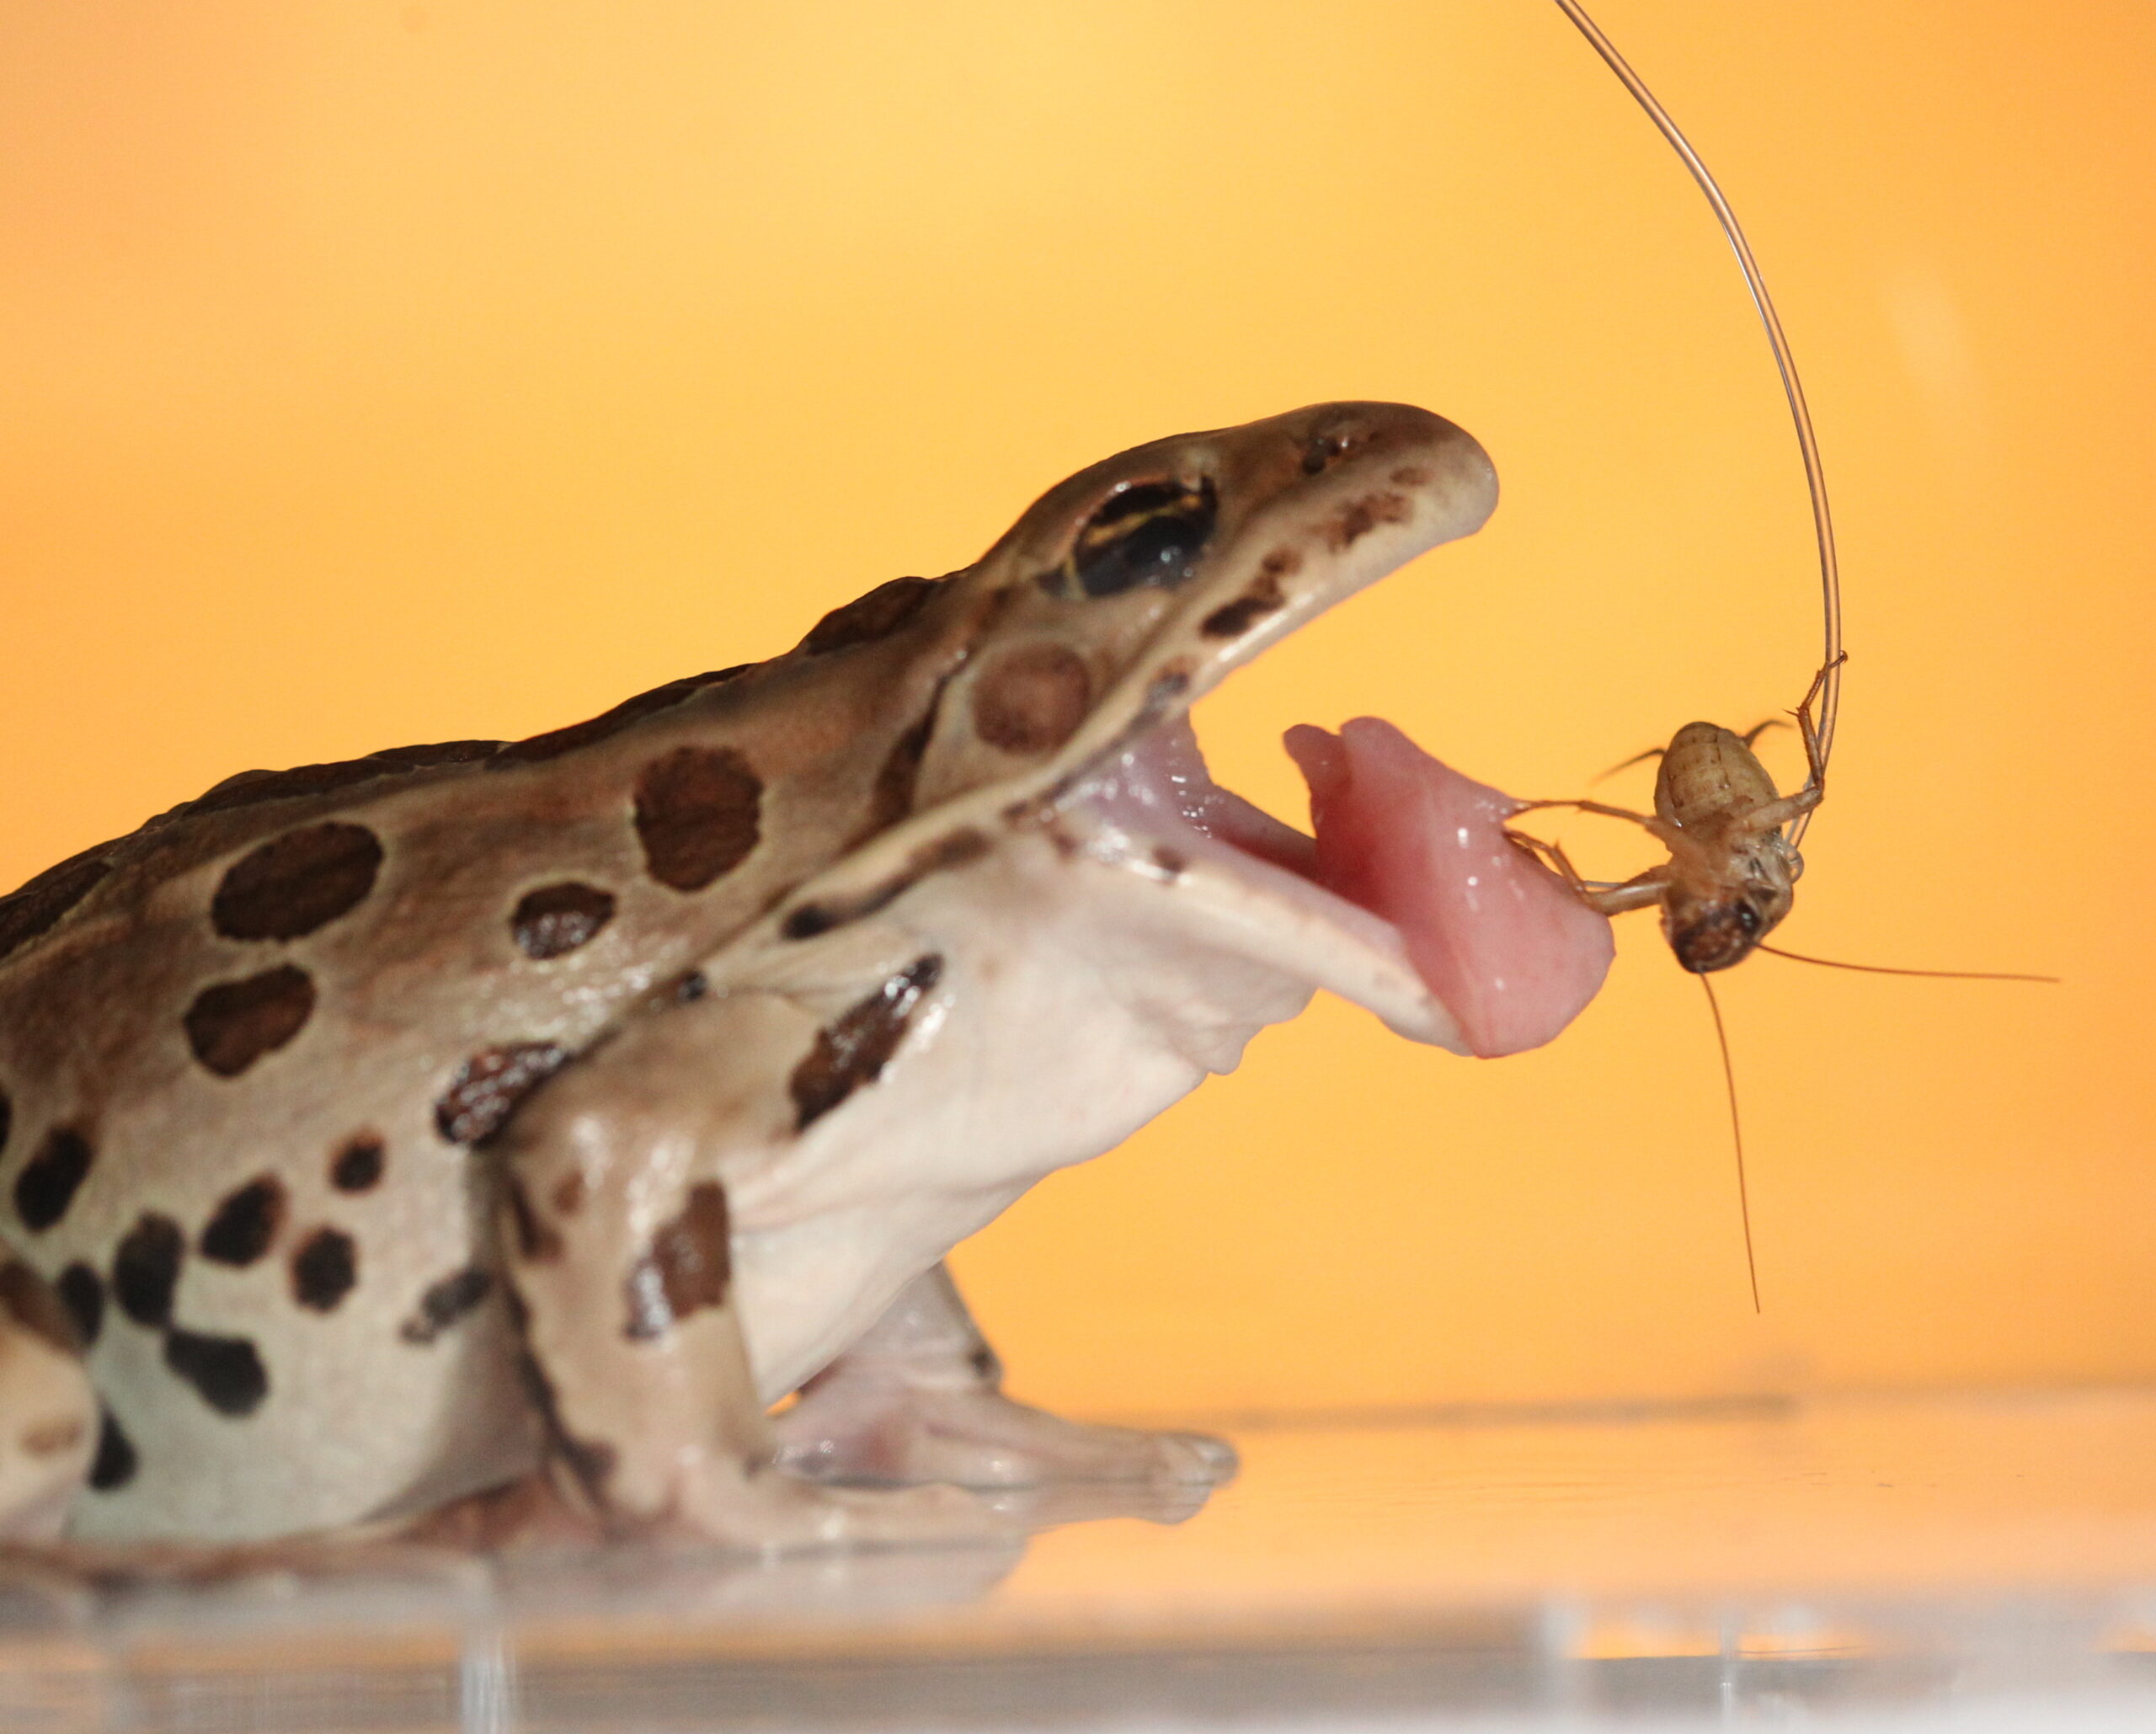 Frogs use elastic tongues and reversible spit to catch prey